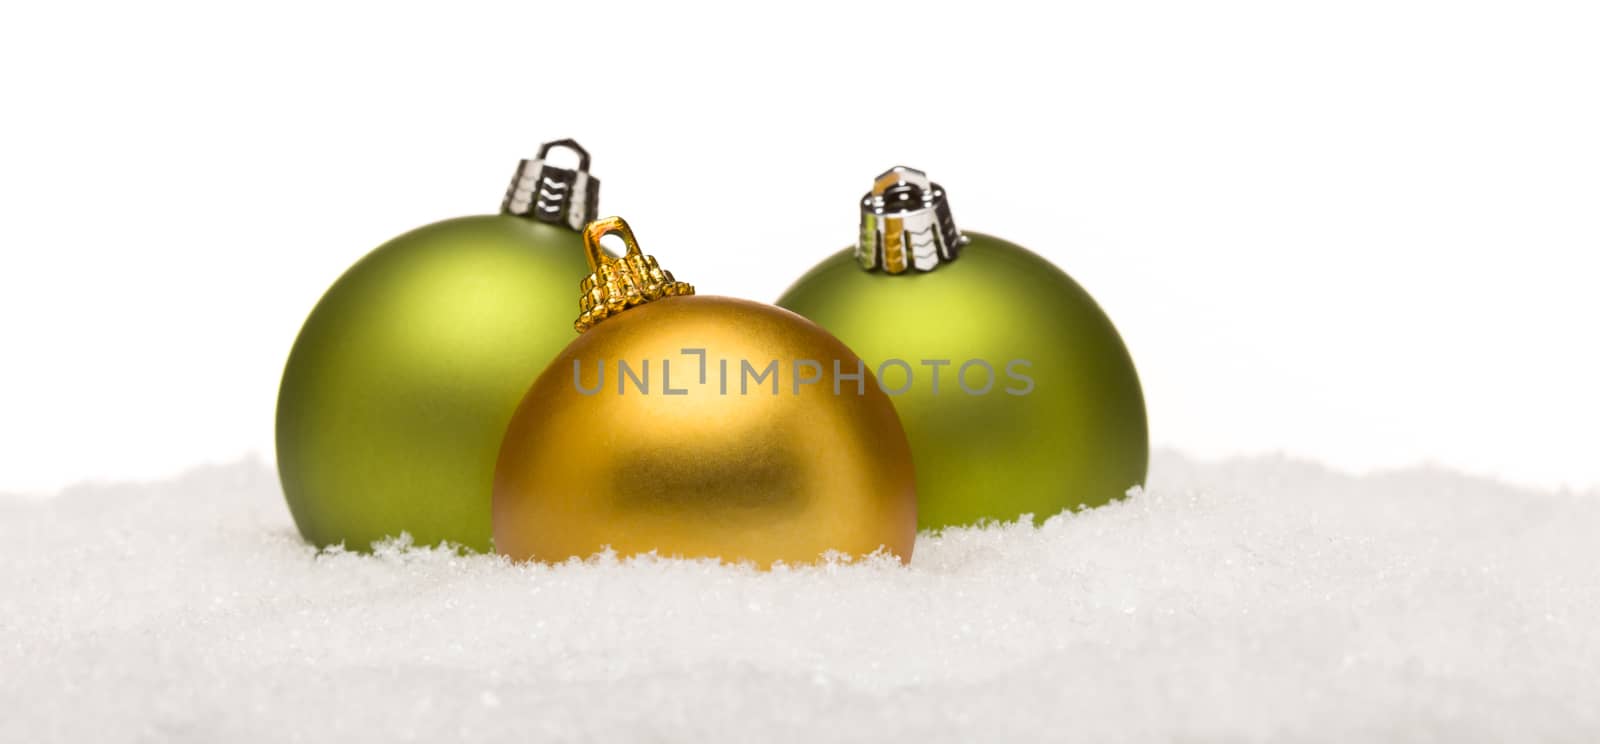 Green and Yellow Christmas Ornaments on Snow Isolated on White by Feverpitched